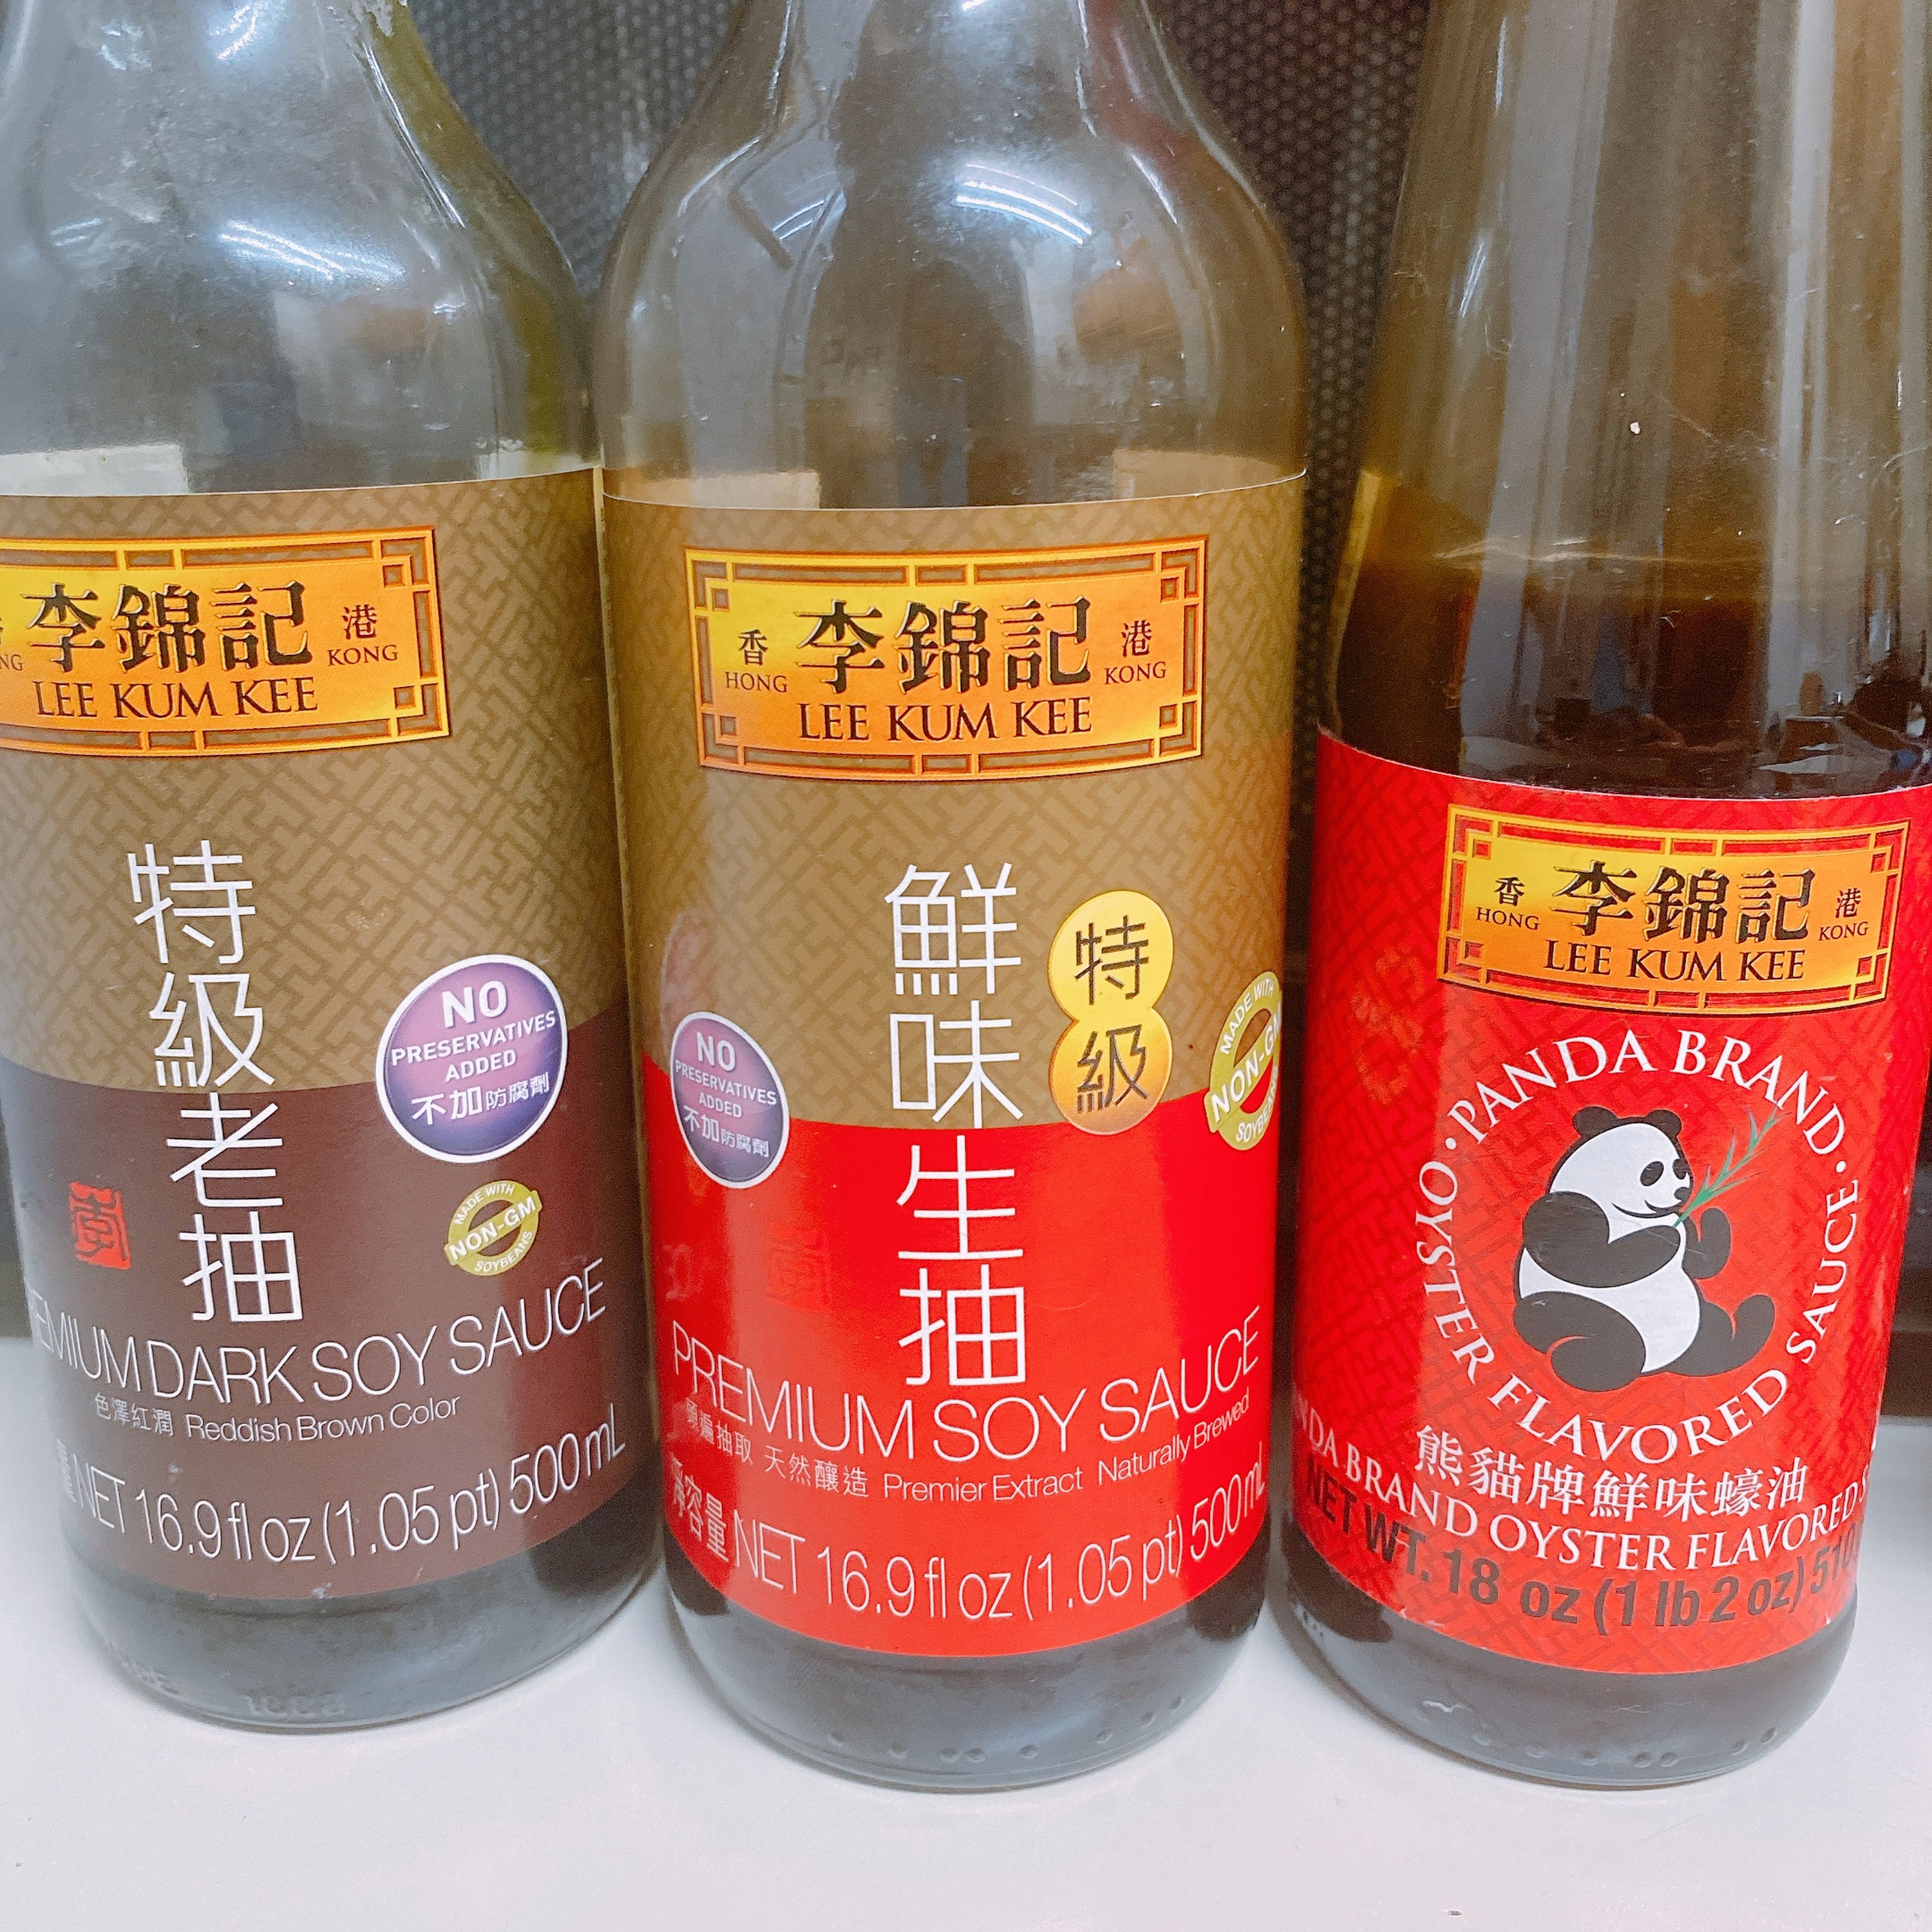 These are the sauces I used. Lee Kum Kee is a very good brand.